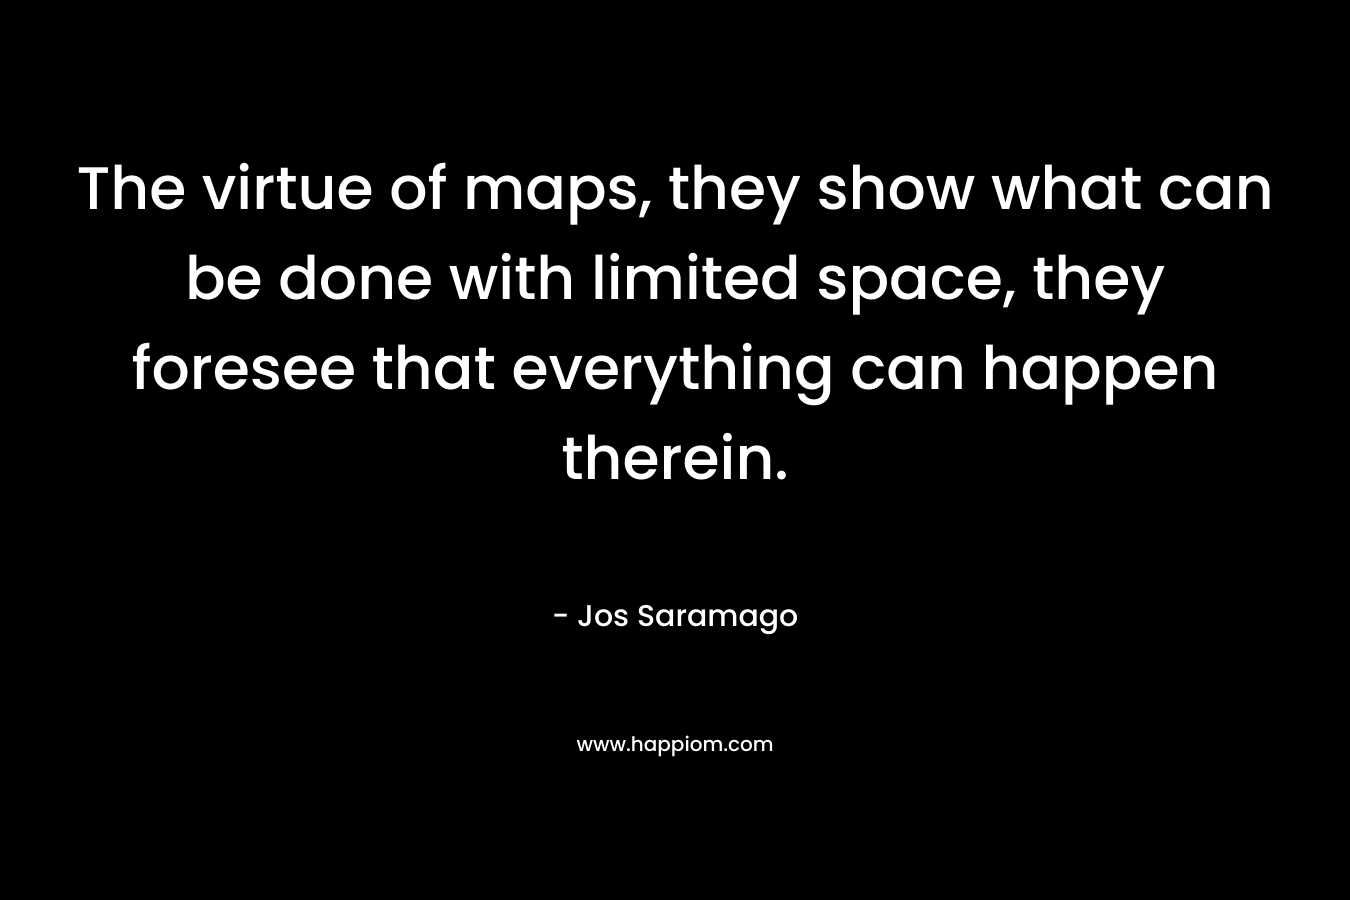 The virtue of maps, they show what can be done with limited space, they foresee that everything can happen therein.